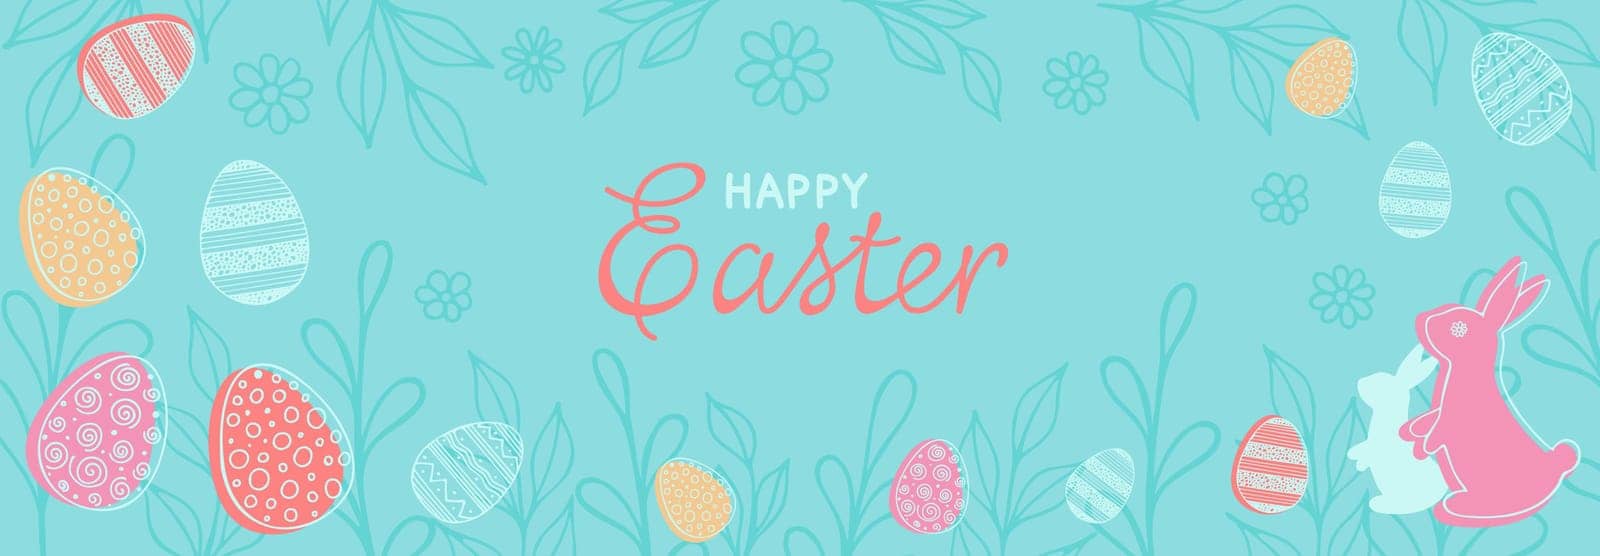 Happy Easter banner. Hand drawn vector illustration with rabbit, eggs, twigs, flowers and lettering for paty Easter design in pastel colors. Good for horizontal poster, greeting card, header for website.